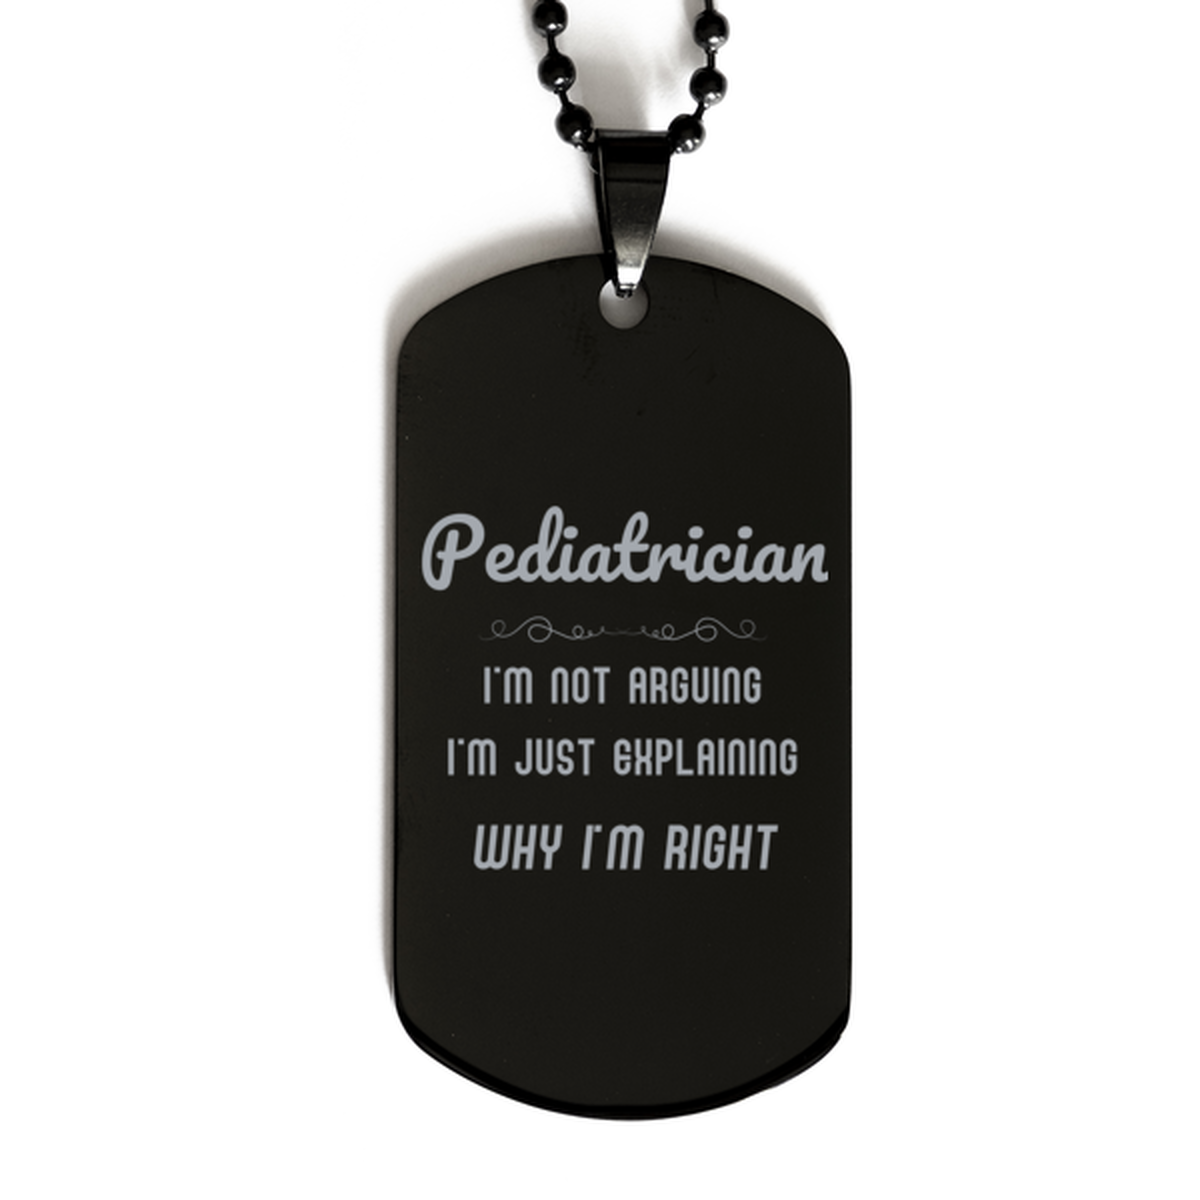 Pediatrician I'm not Arguing. I'm Just Explaining Why I'm RIGHT Black Dog Tag, Funny Saying Quote Pediatrician Gifts For Pediatrician Graduation Birthday Christmas Gifts for Men Women Coworker